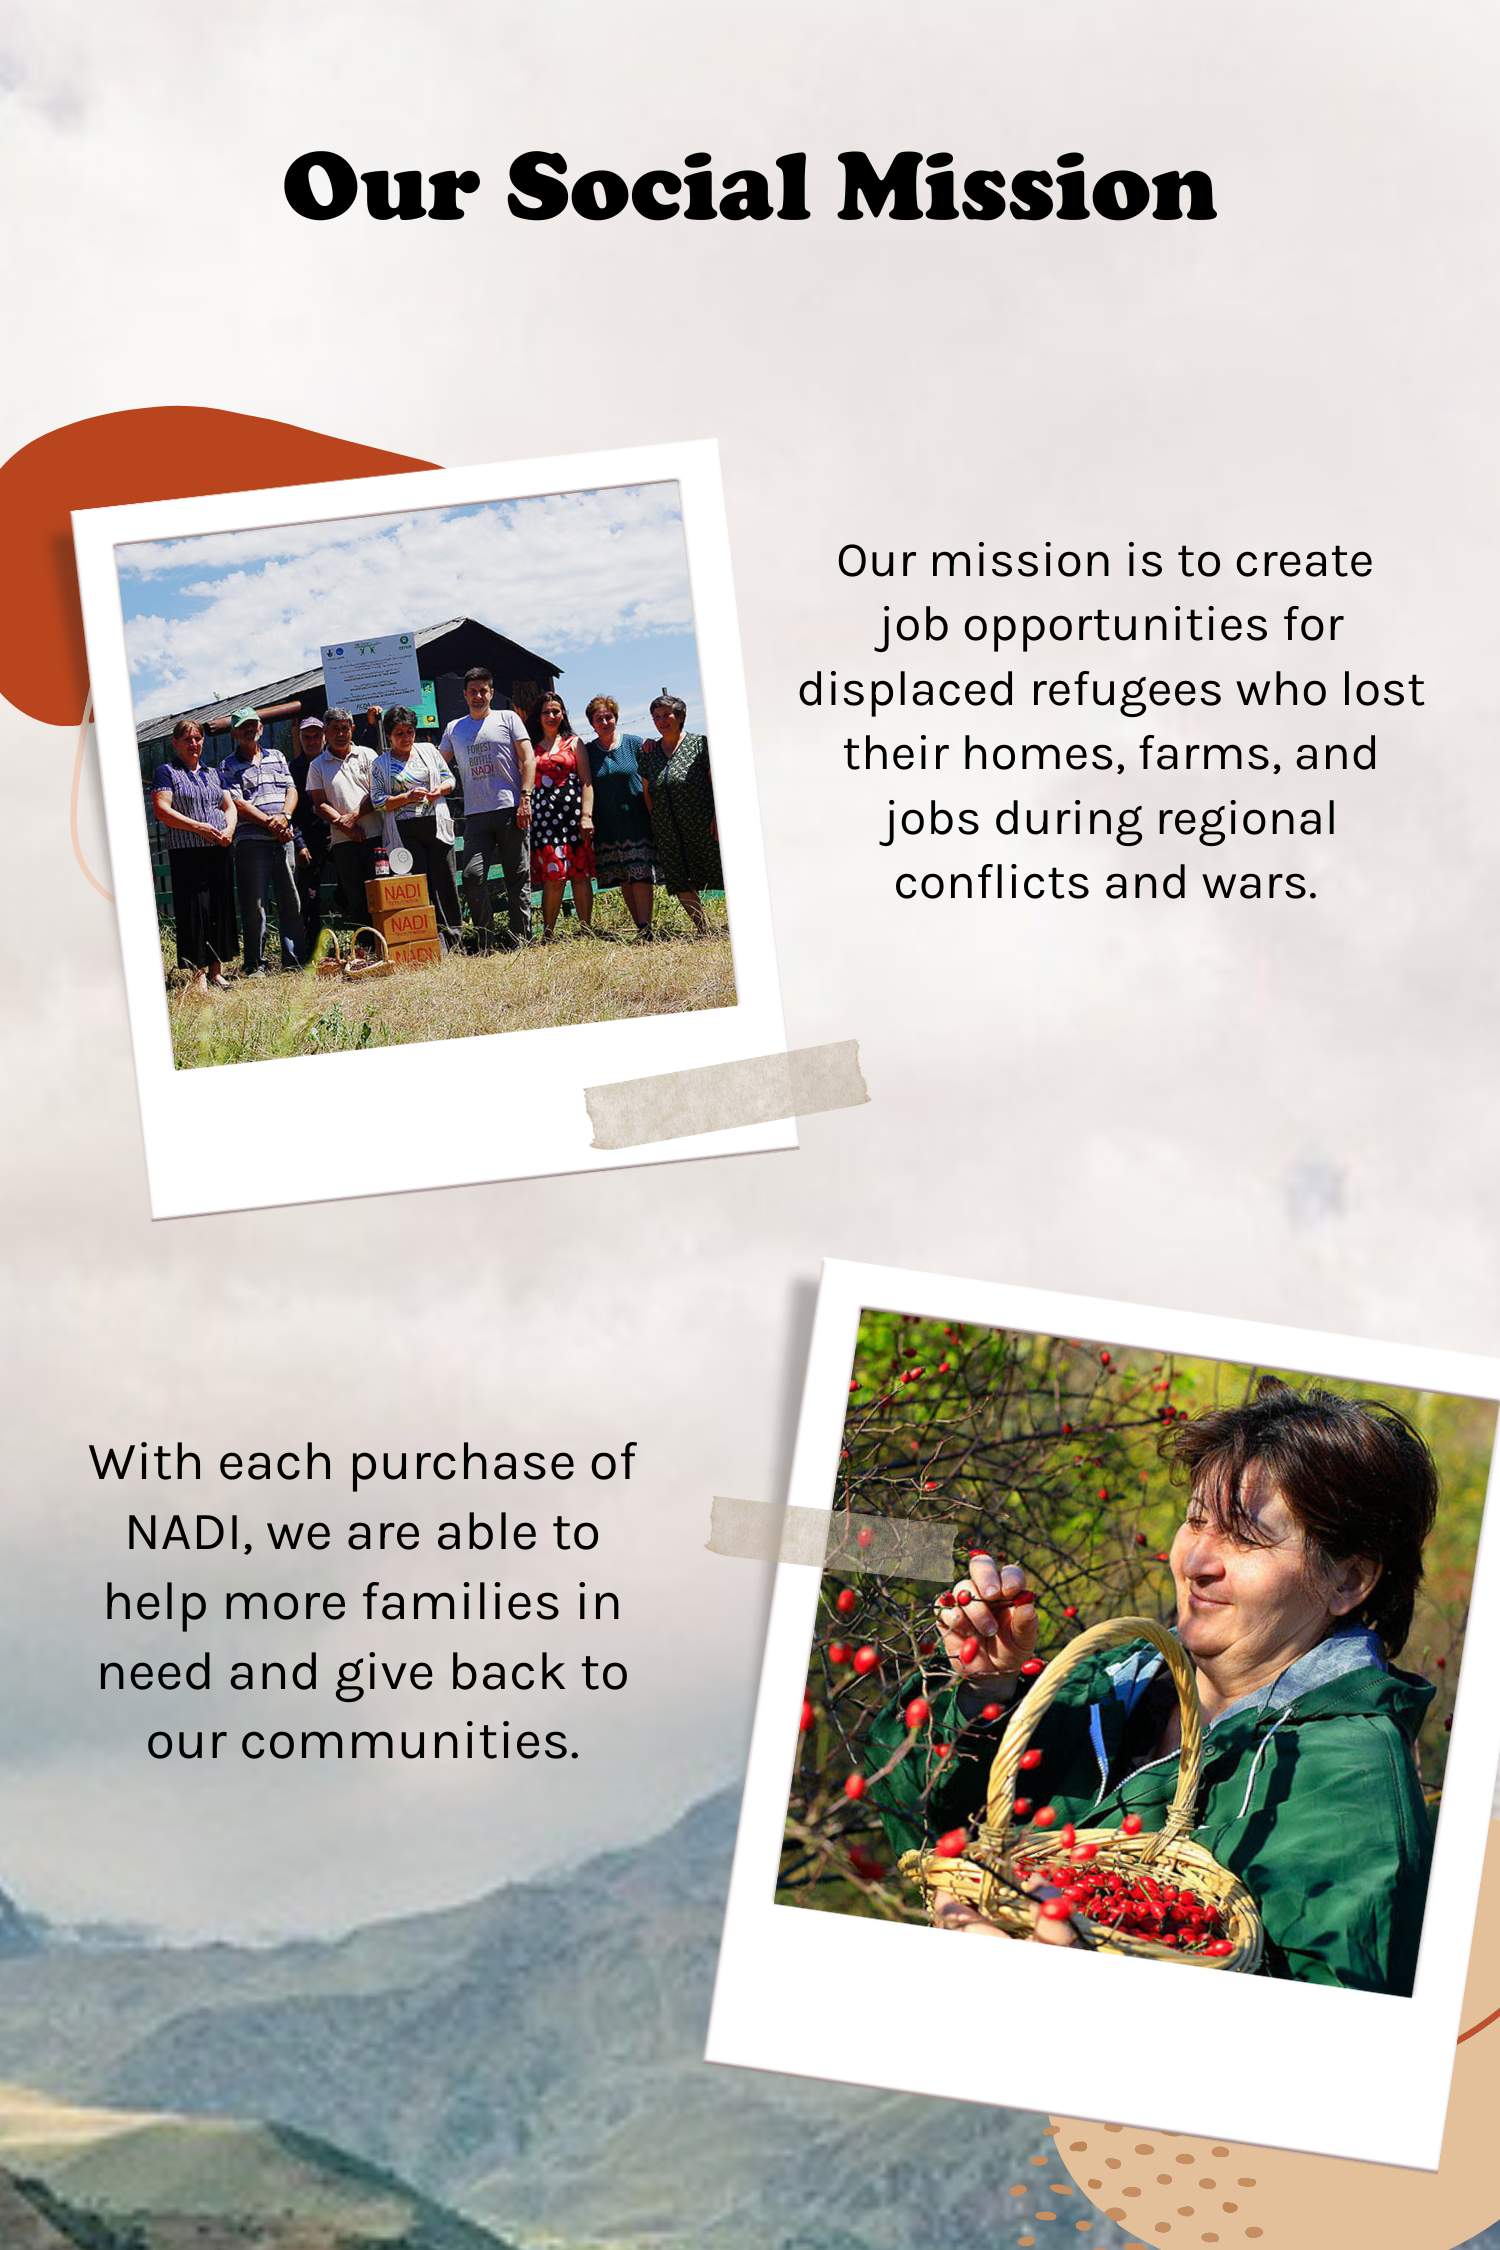 NADI's mission is to create jobs for displaced reugees who lost their homes, farms and jobs during regional conflicts of war.